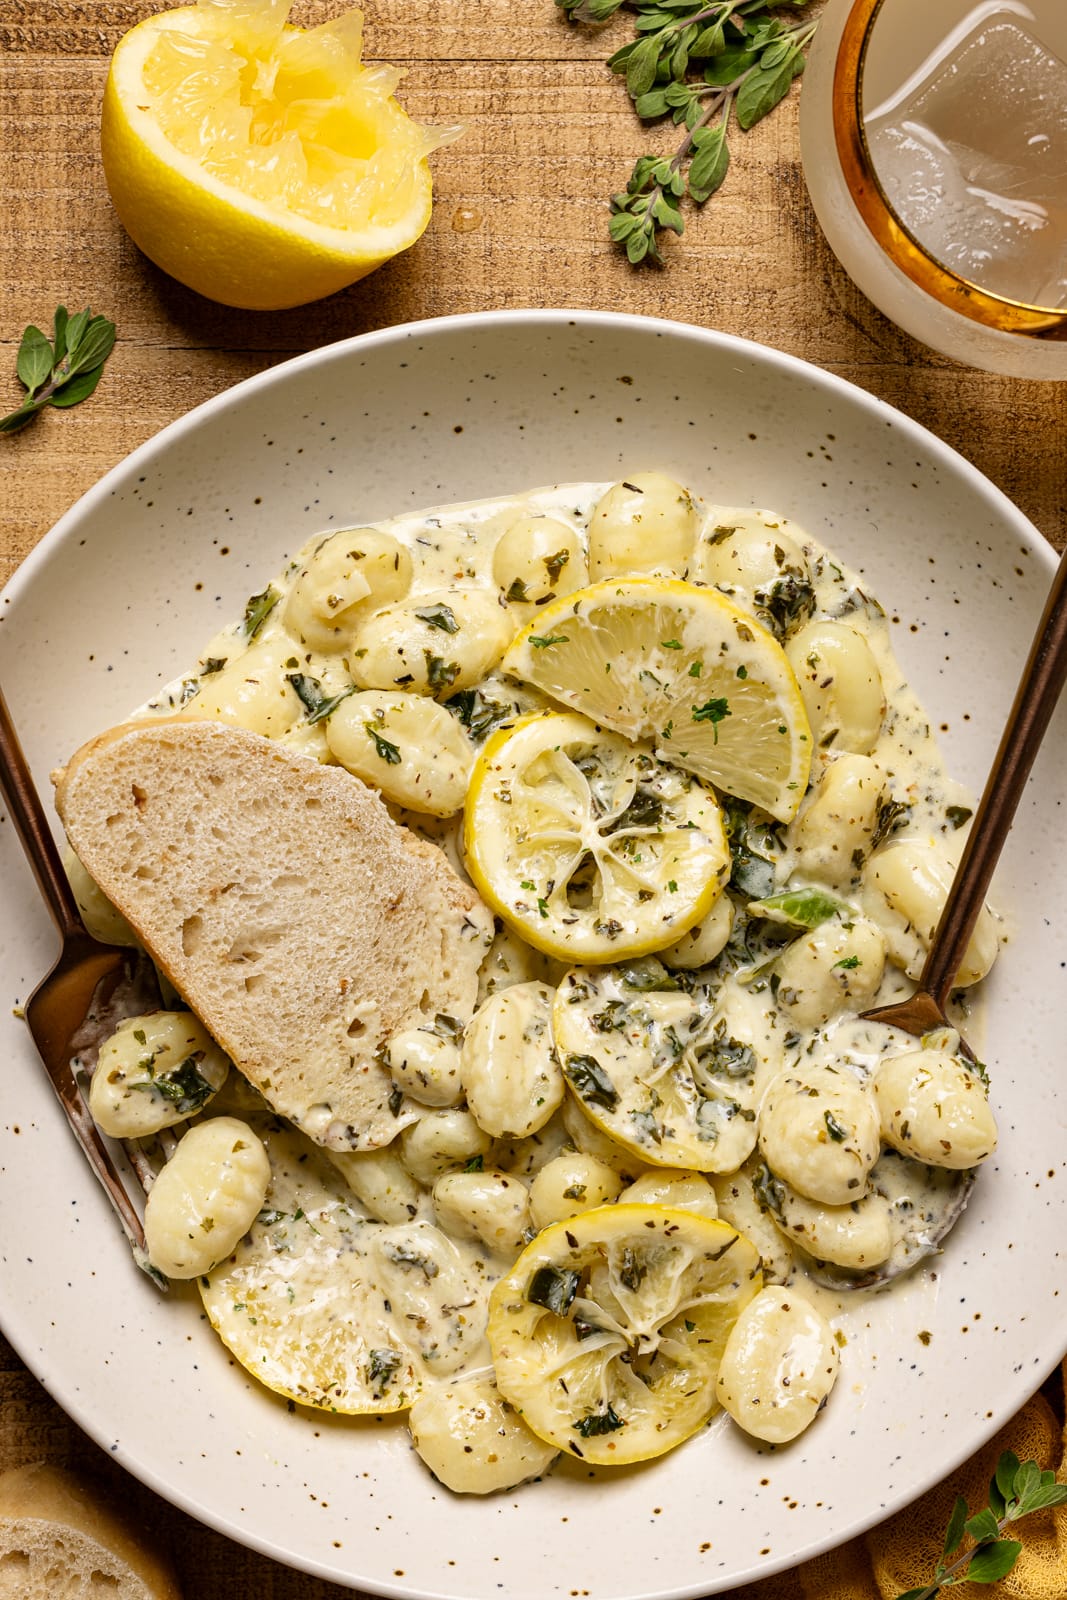 Gnocchi in a plate with a slice of bread, lemon slices, and a spoon + fork.